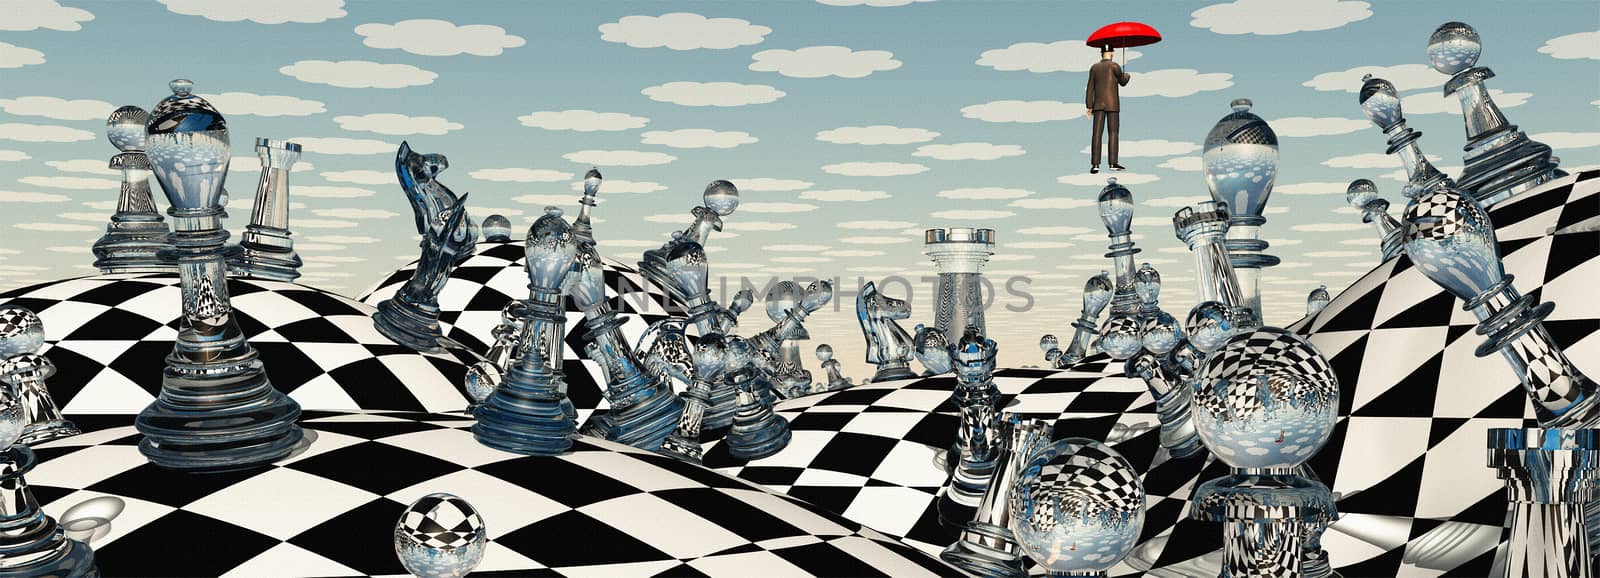 Surreal Chess by applesstock